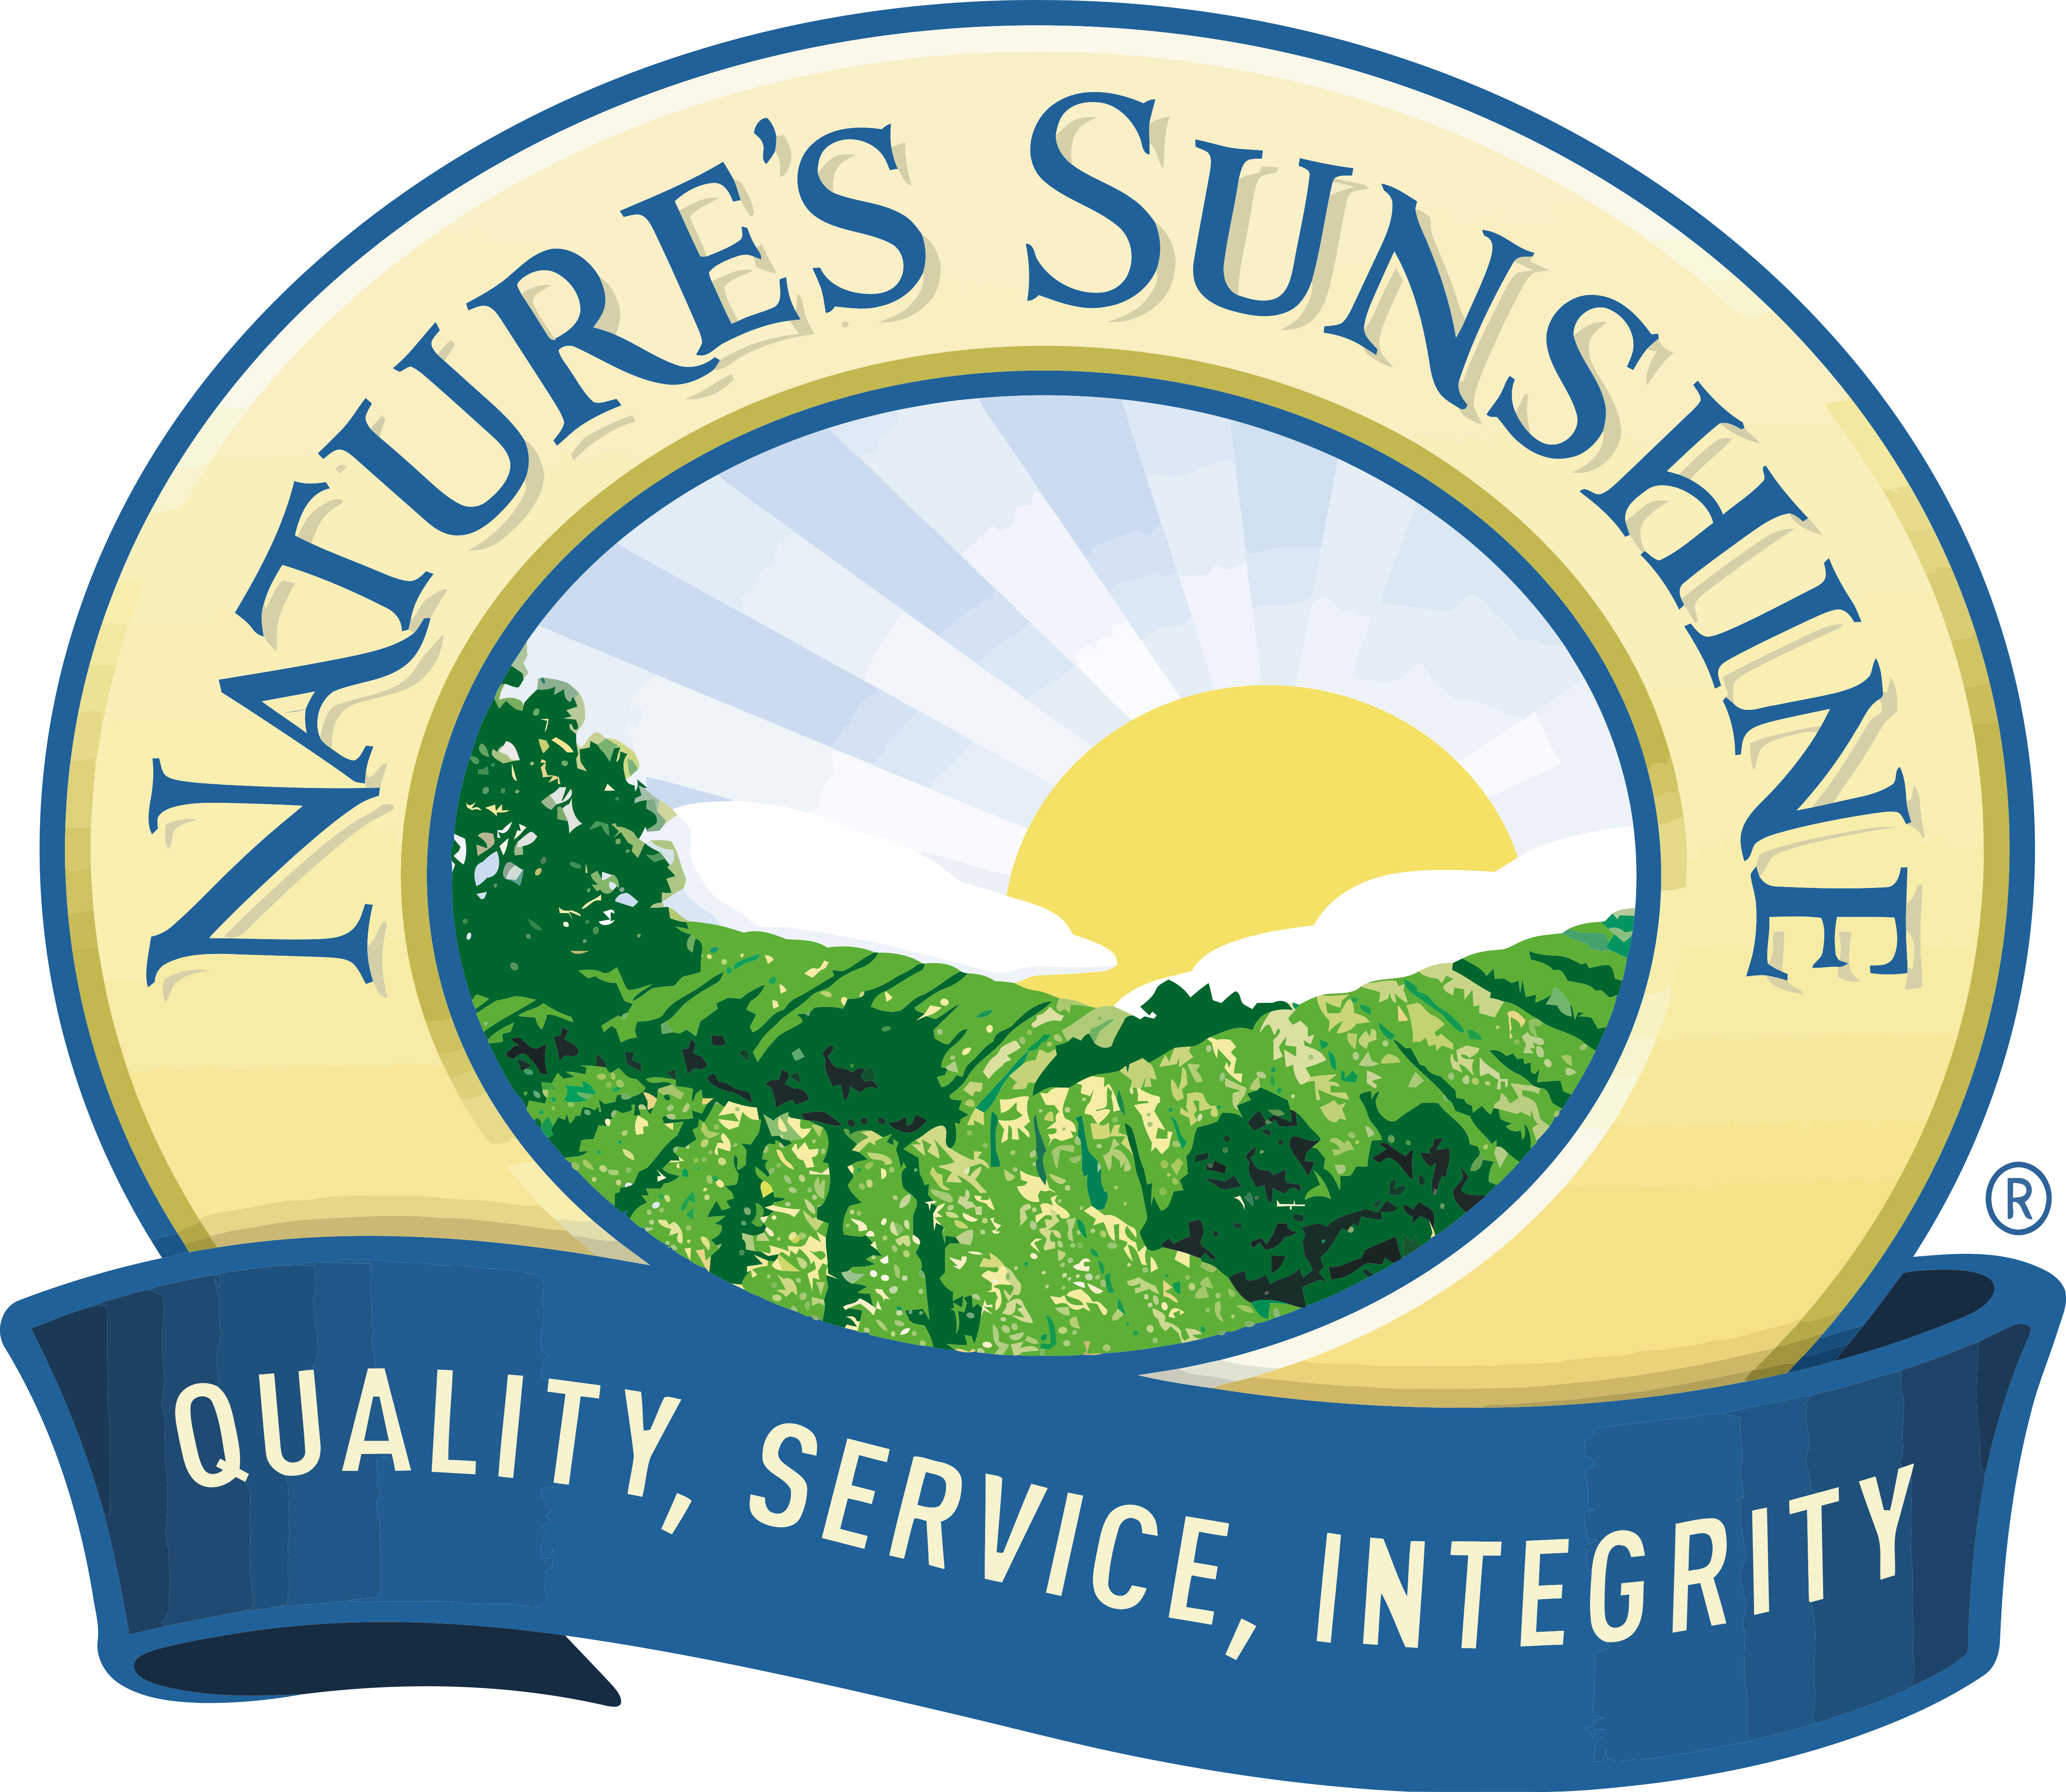 Nature’s Sunshine Products, Inc. – Logos Download